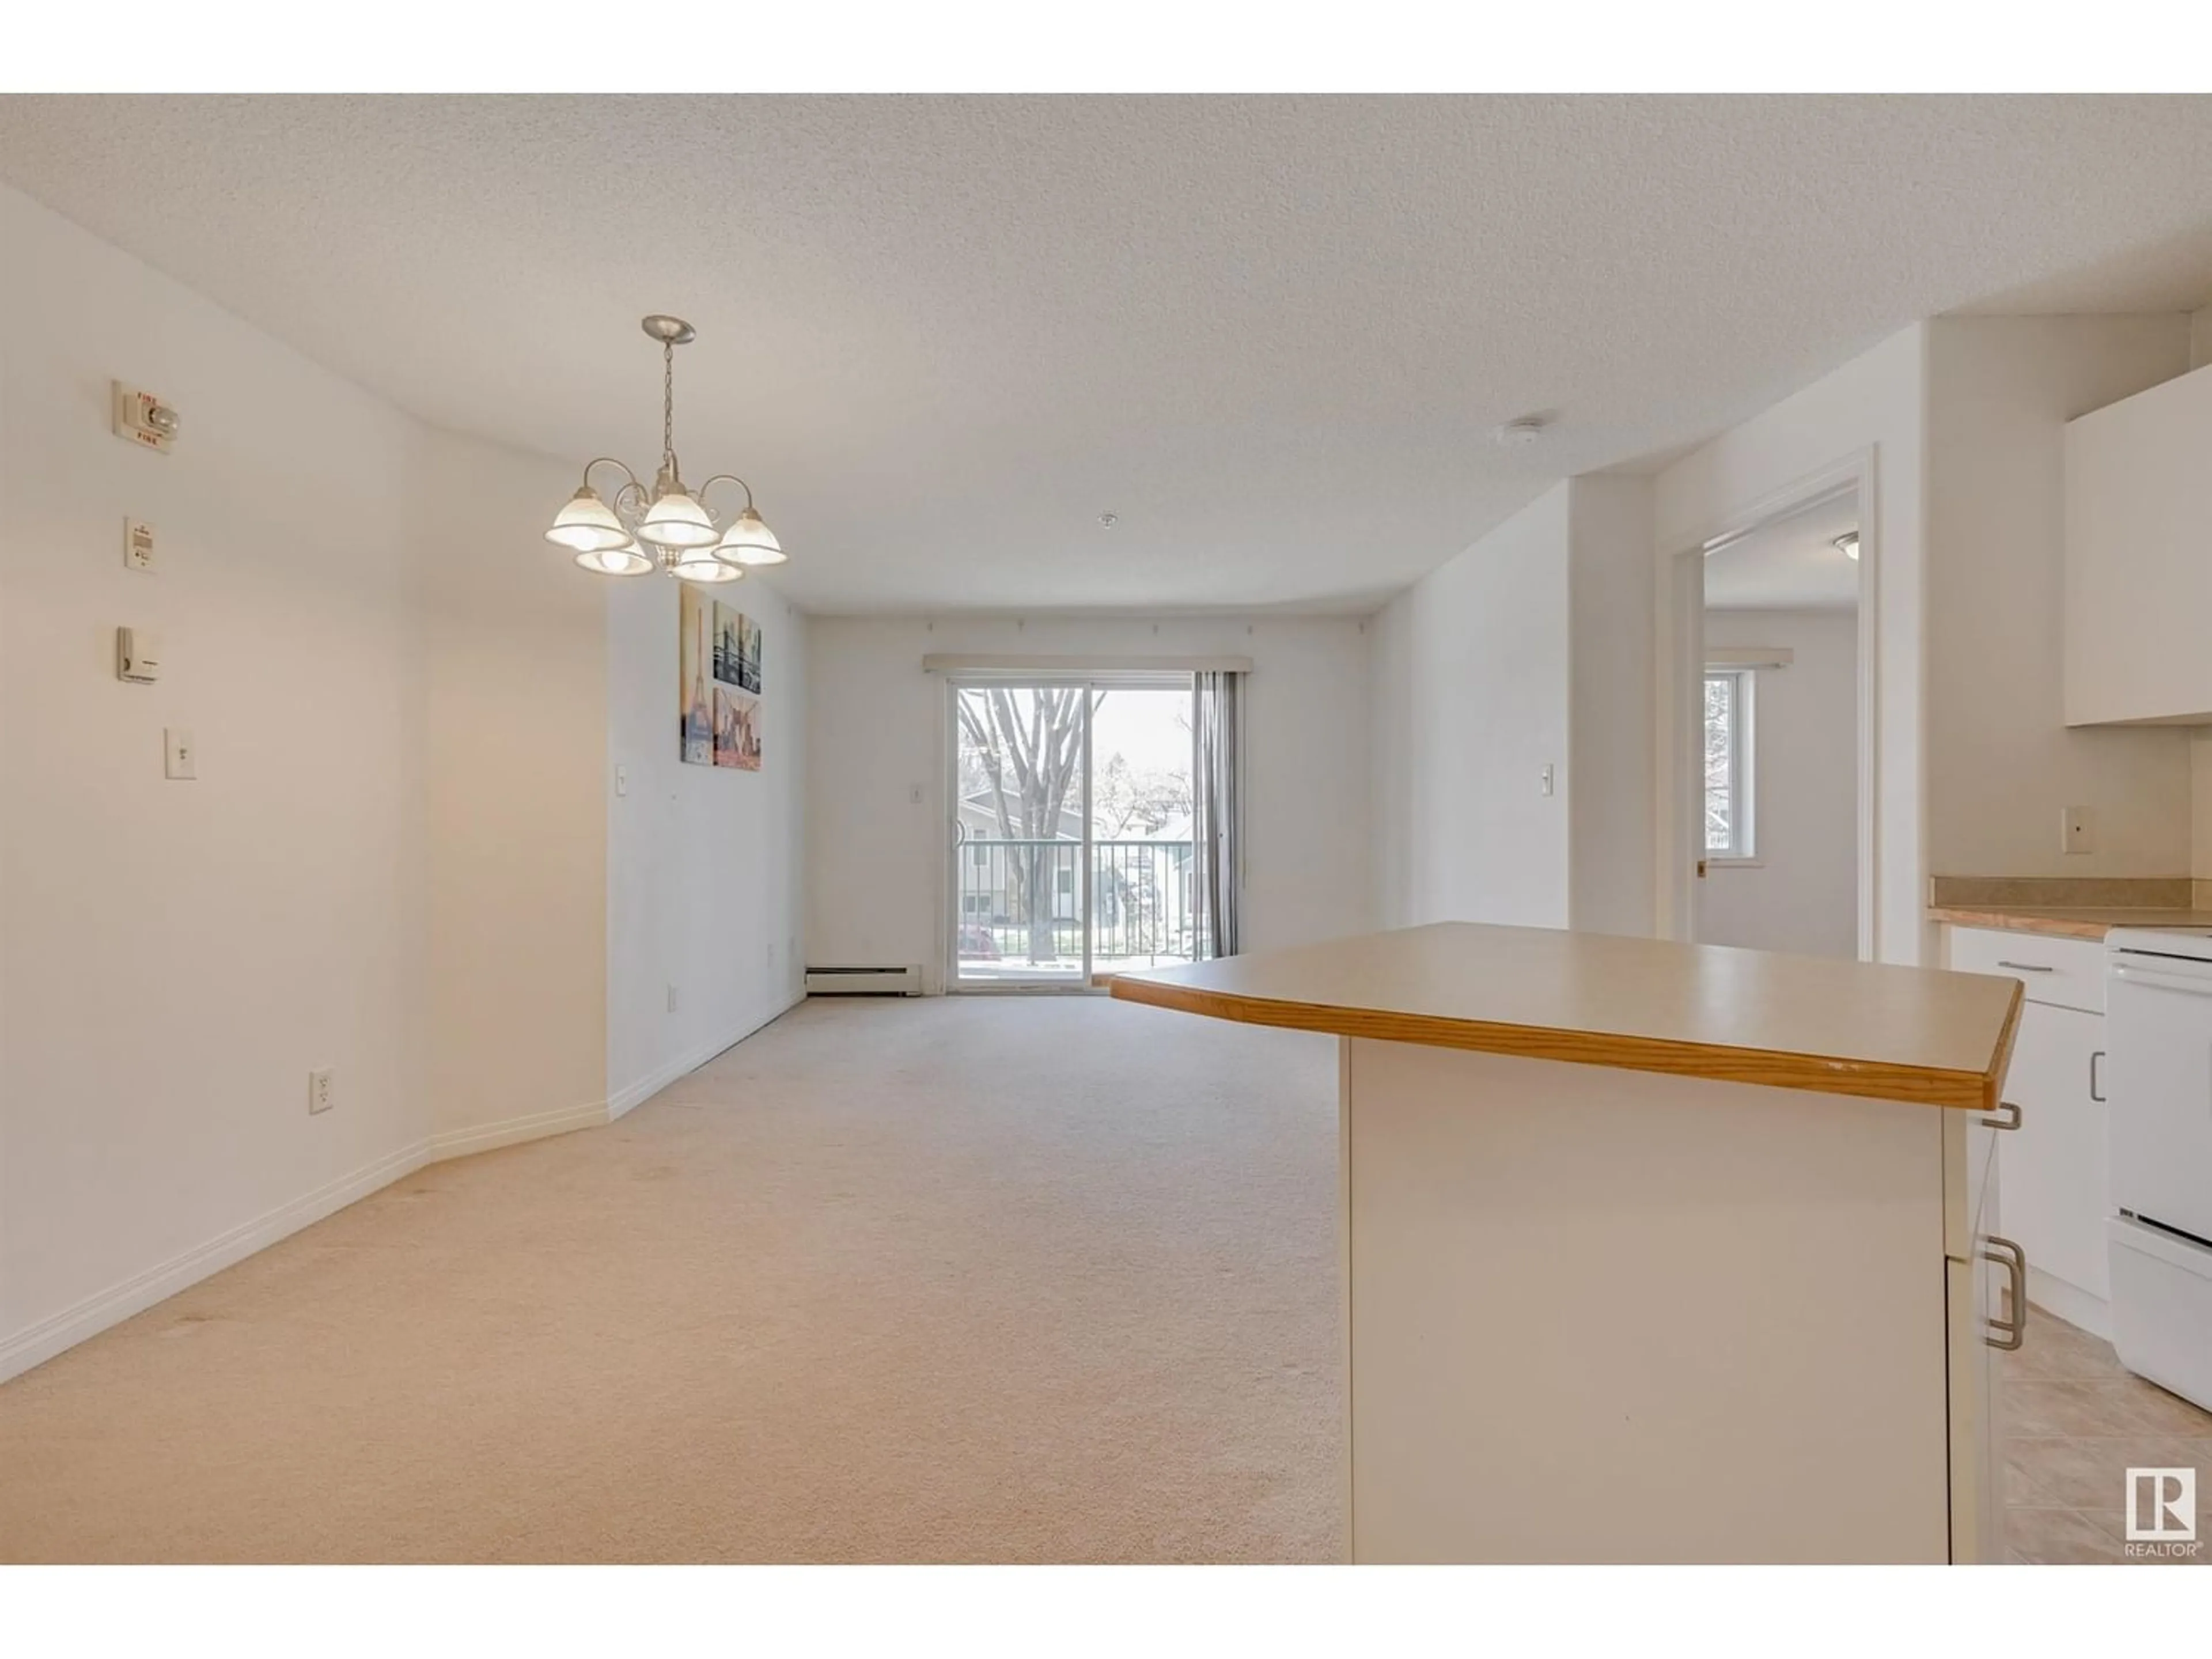 A pic of a room for #215 11325 83 ST NW, Edmonton Alberta T5B4W5